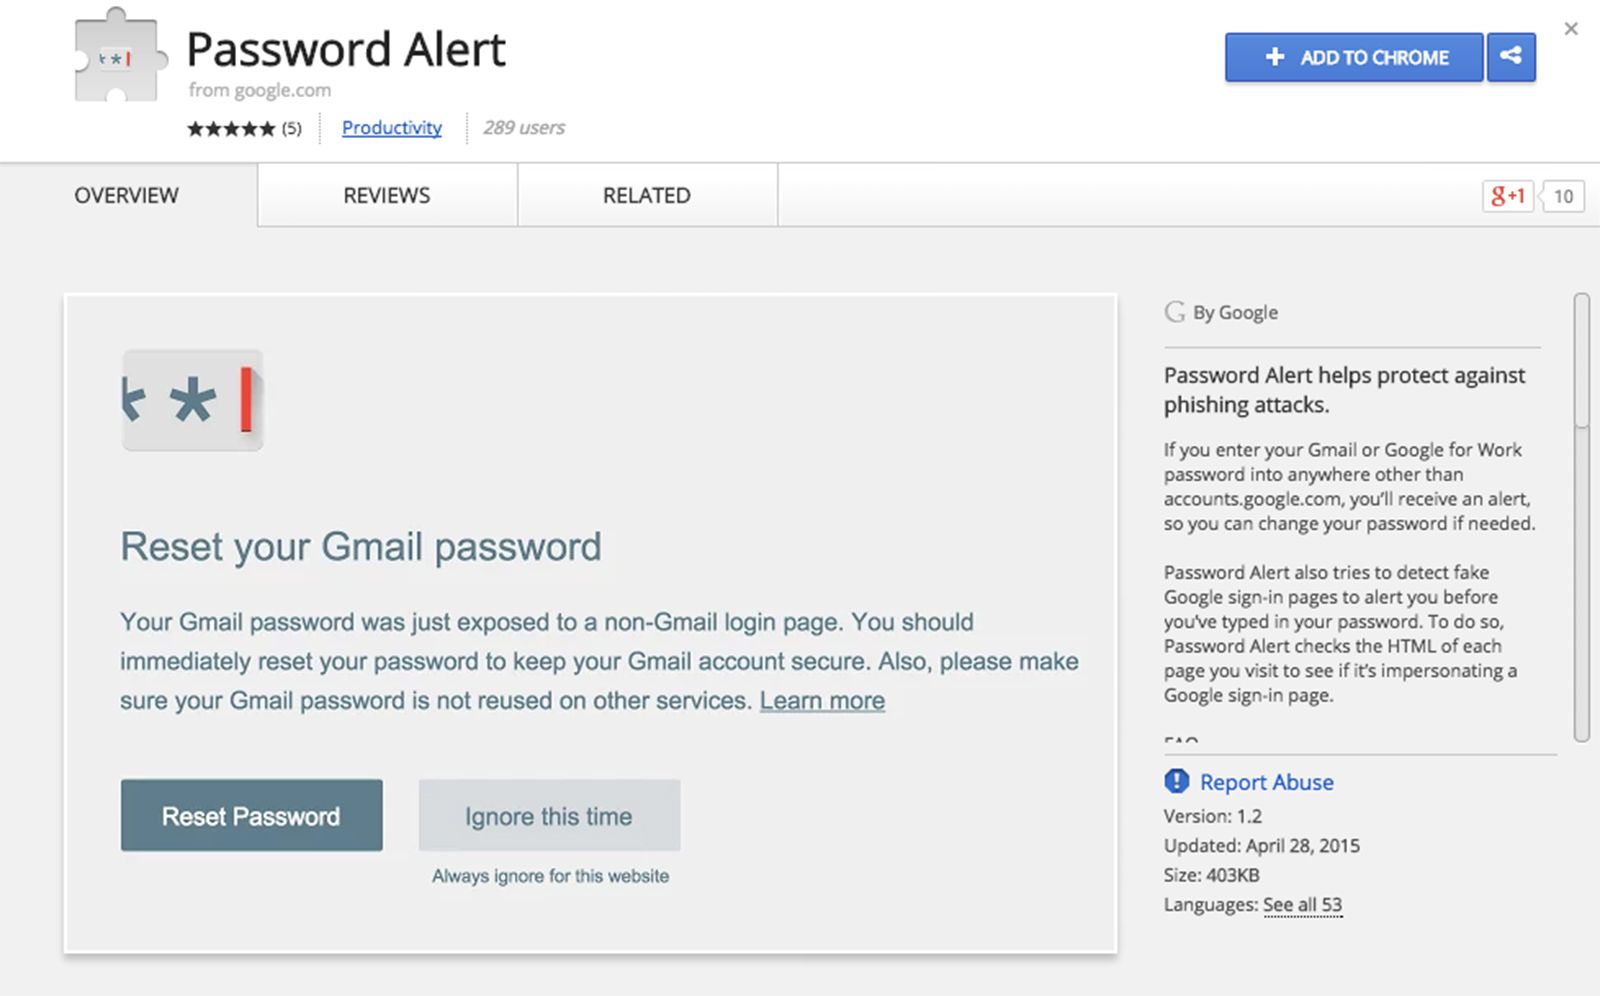 google s new password alert chrome extension keeps you safe from phishing scams image 1